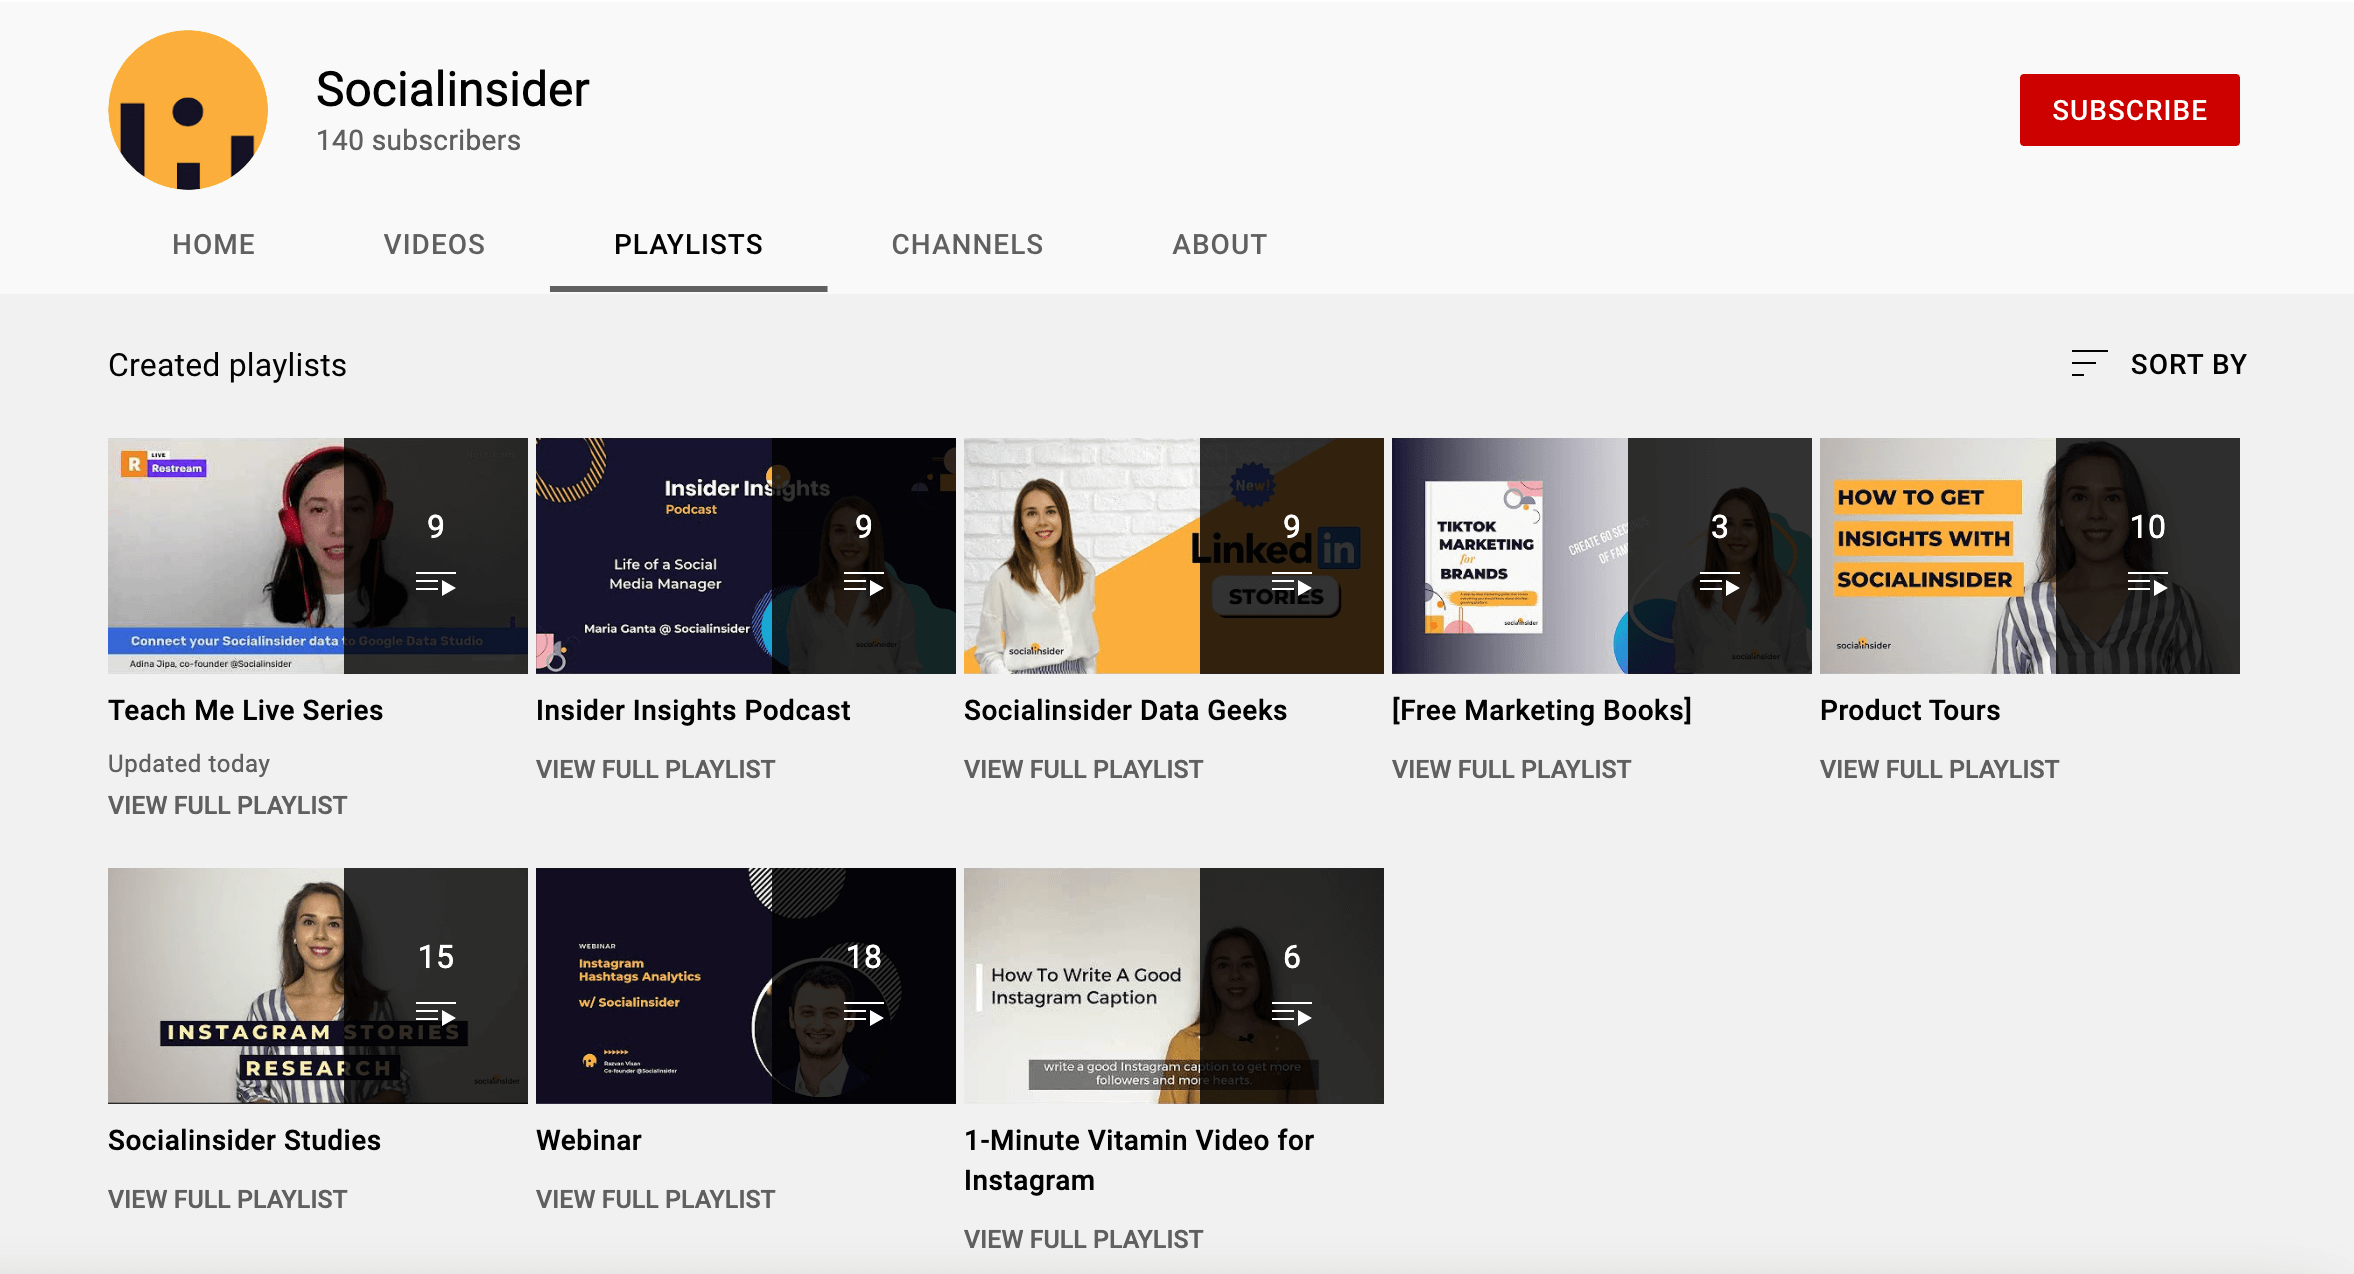 Here's an example of how Socialinsider organizes its youtube playlists.